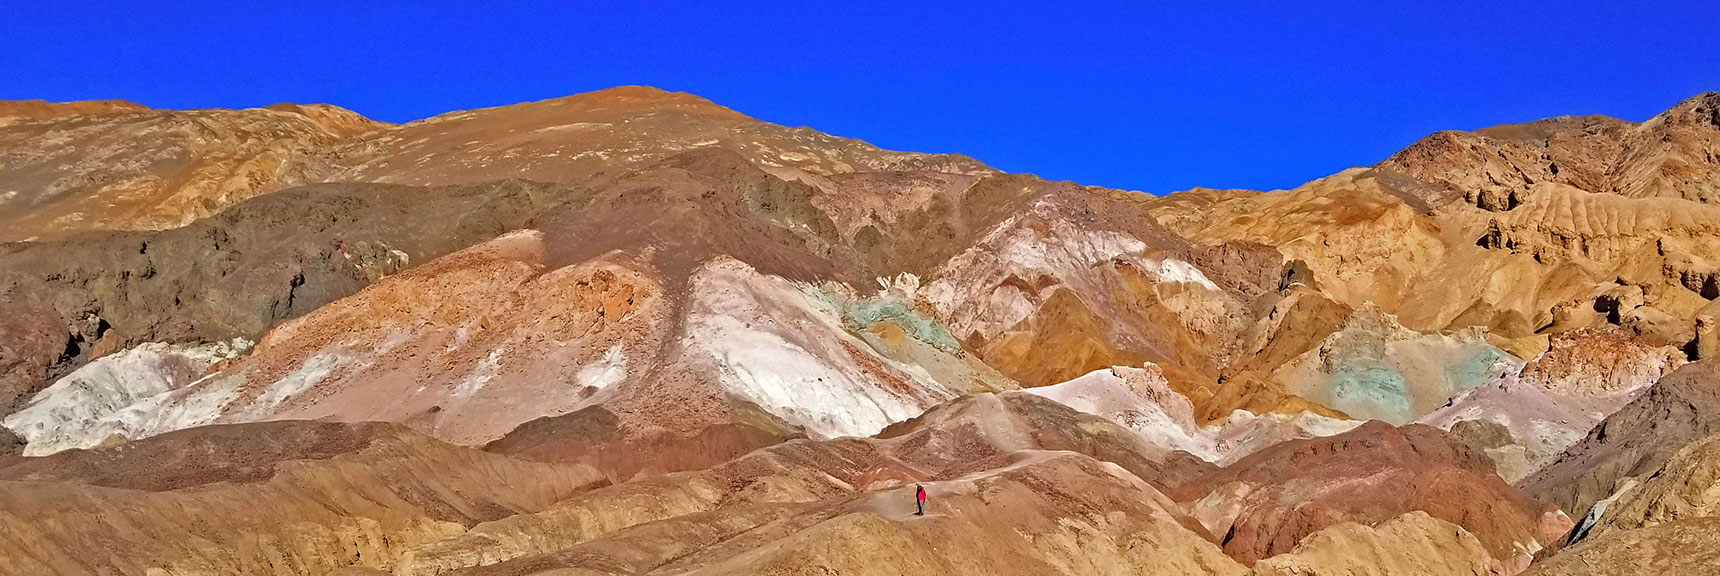 Colorful Hills of Artist's Pallet | Artists Drive Hidden Canyon Hikes | Death Valley National Park, California